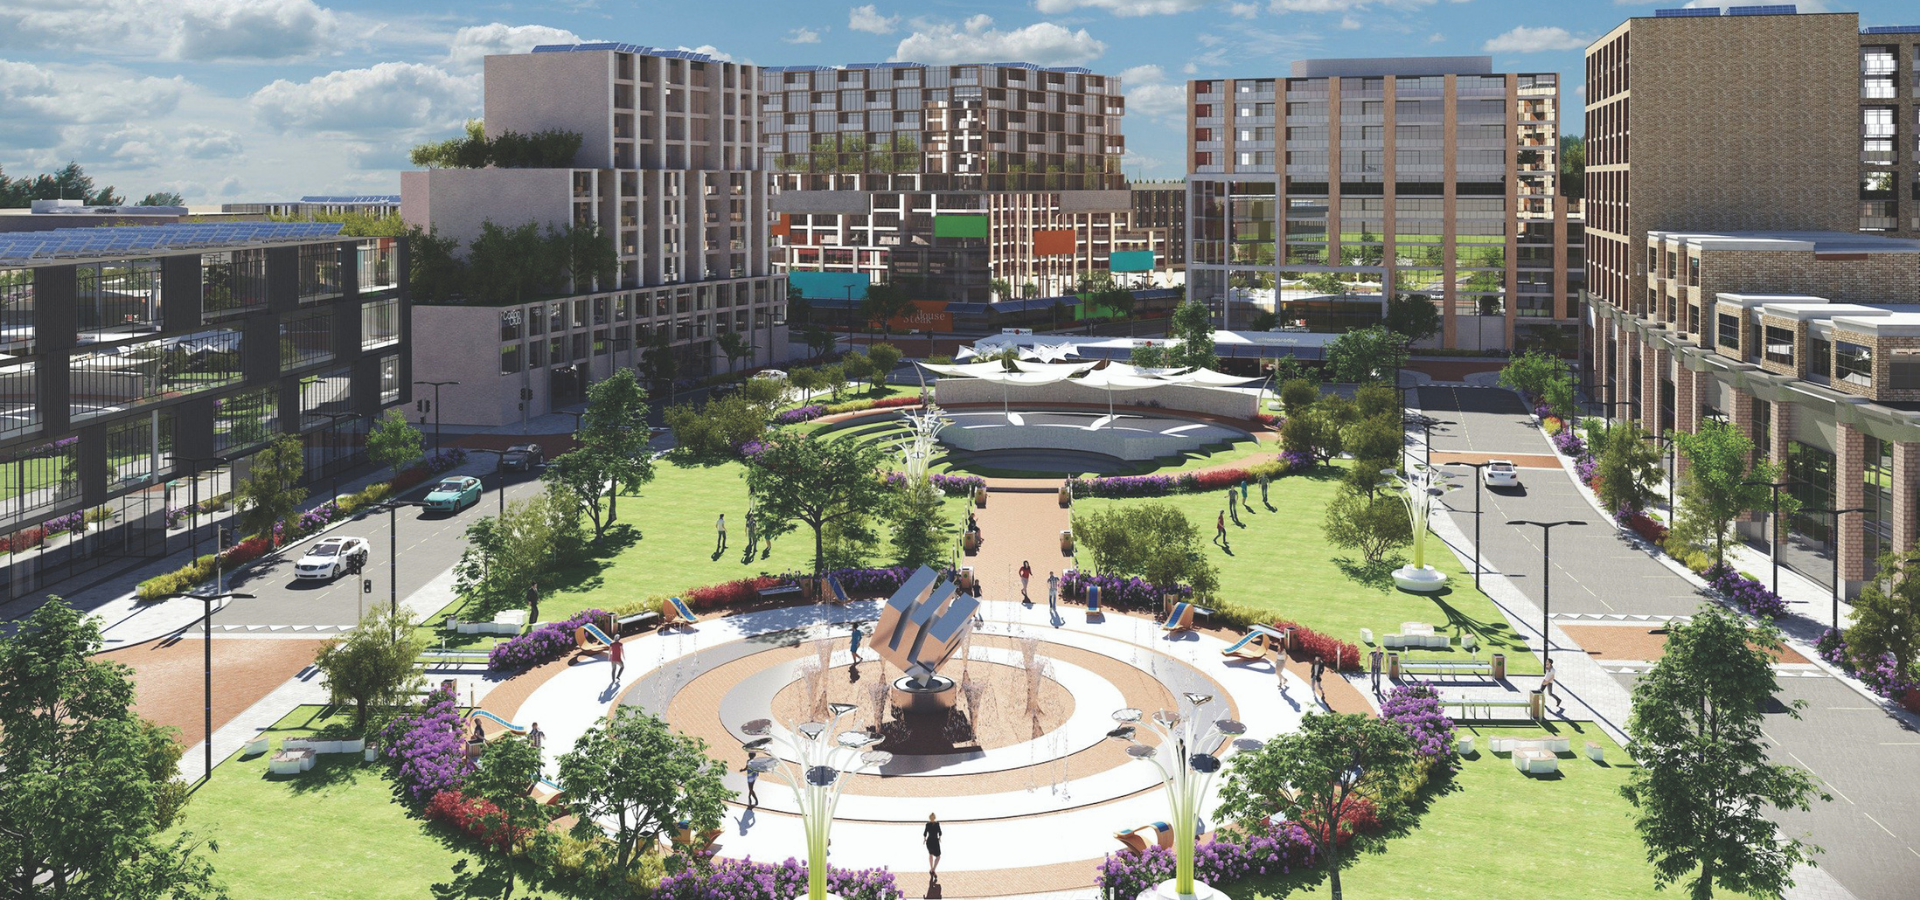 Rendering of the West 5 community.